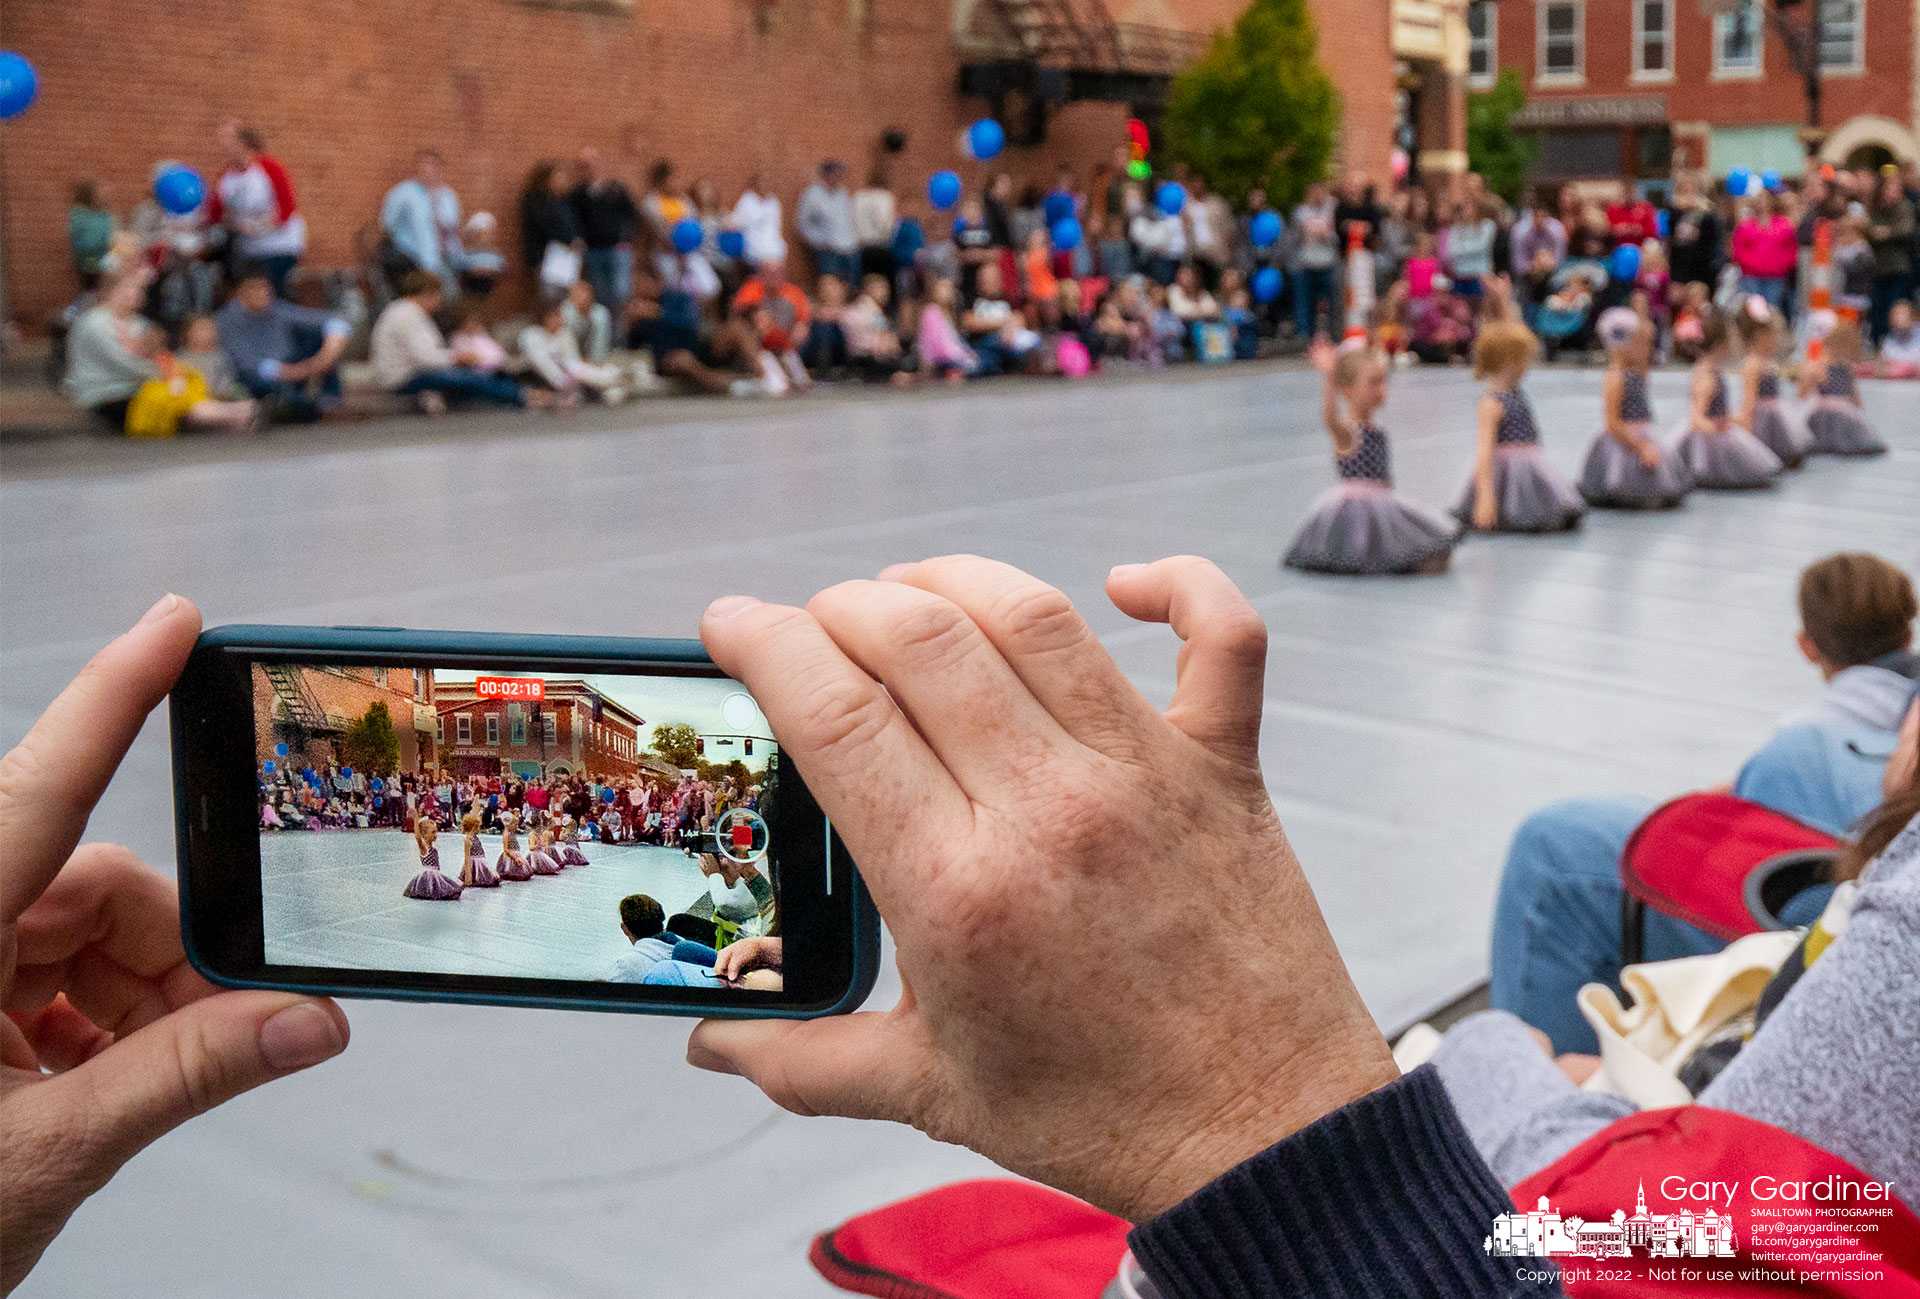 A mother uses her phone to record video of her daughter as part of Generations dancers performing on West College during Fourth Friday. My Final Photo for September 23, 2022.